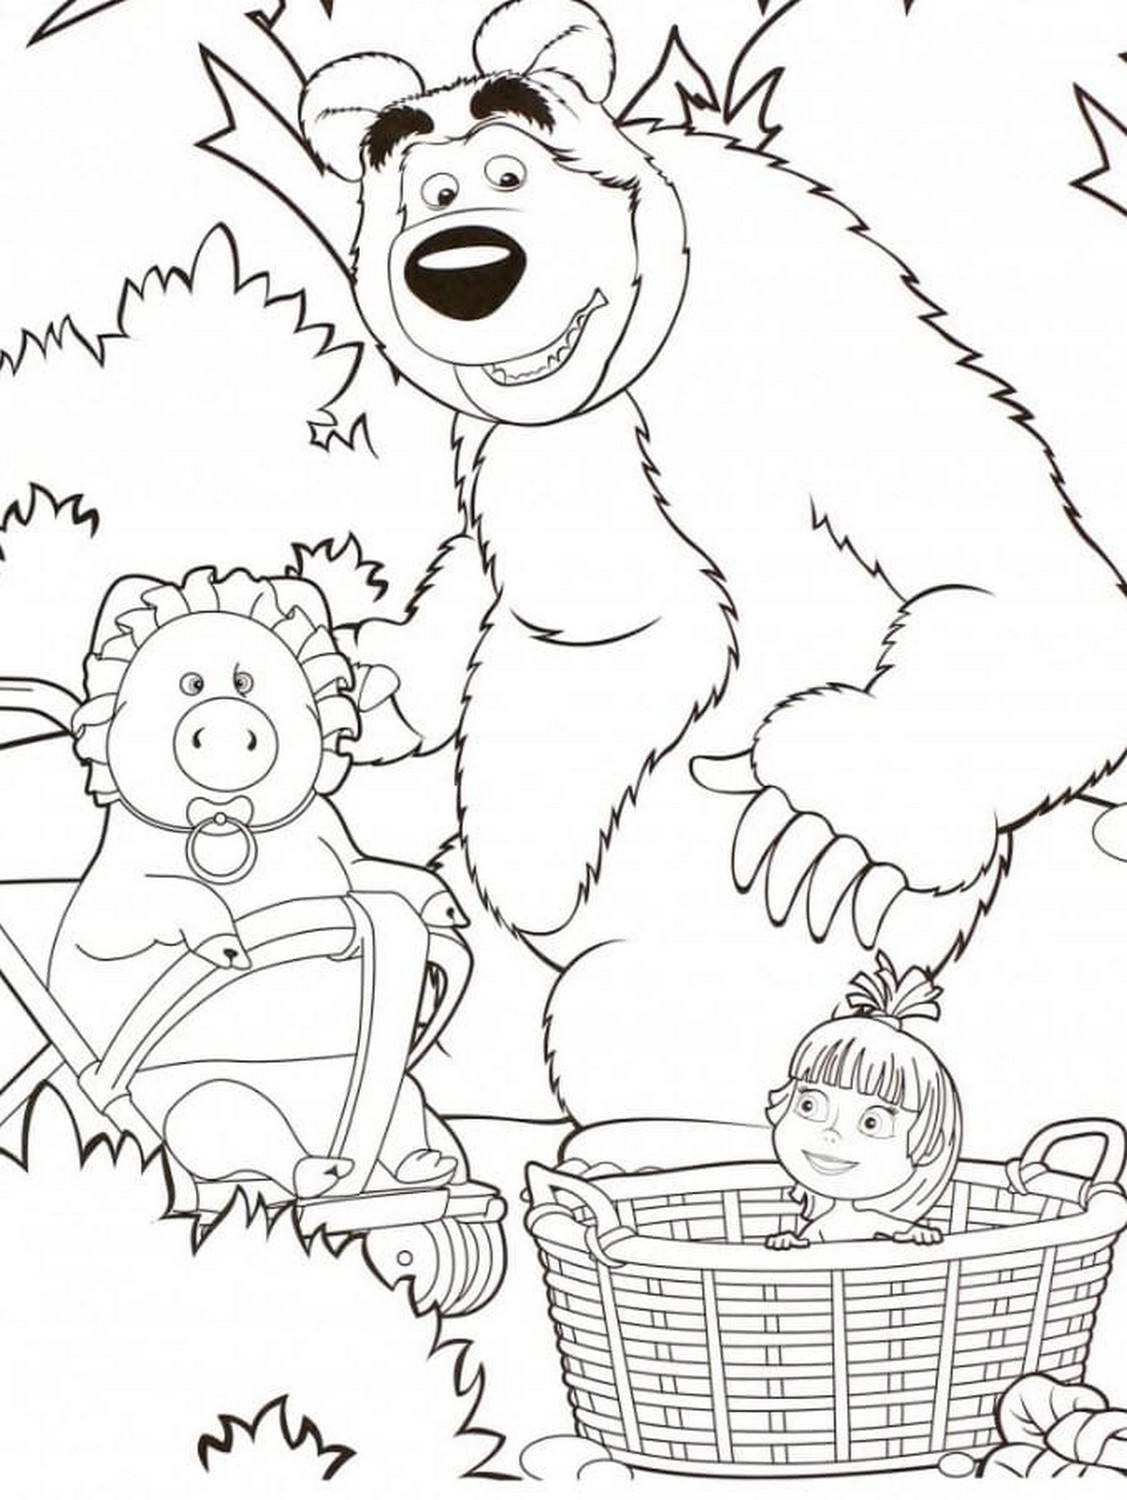 Masha and the Bear 71 drawing from Masha and the Bear to print and color